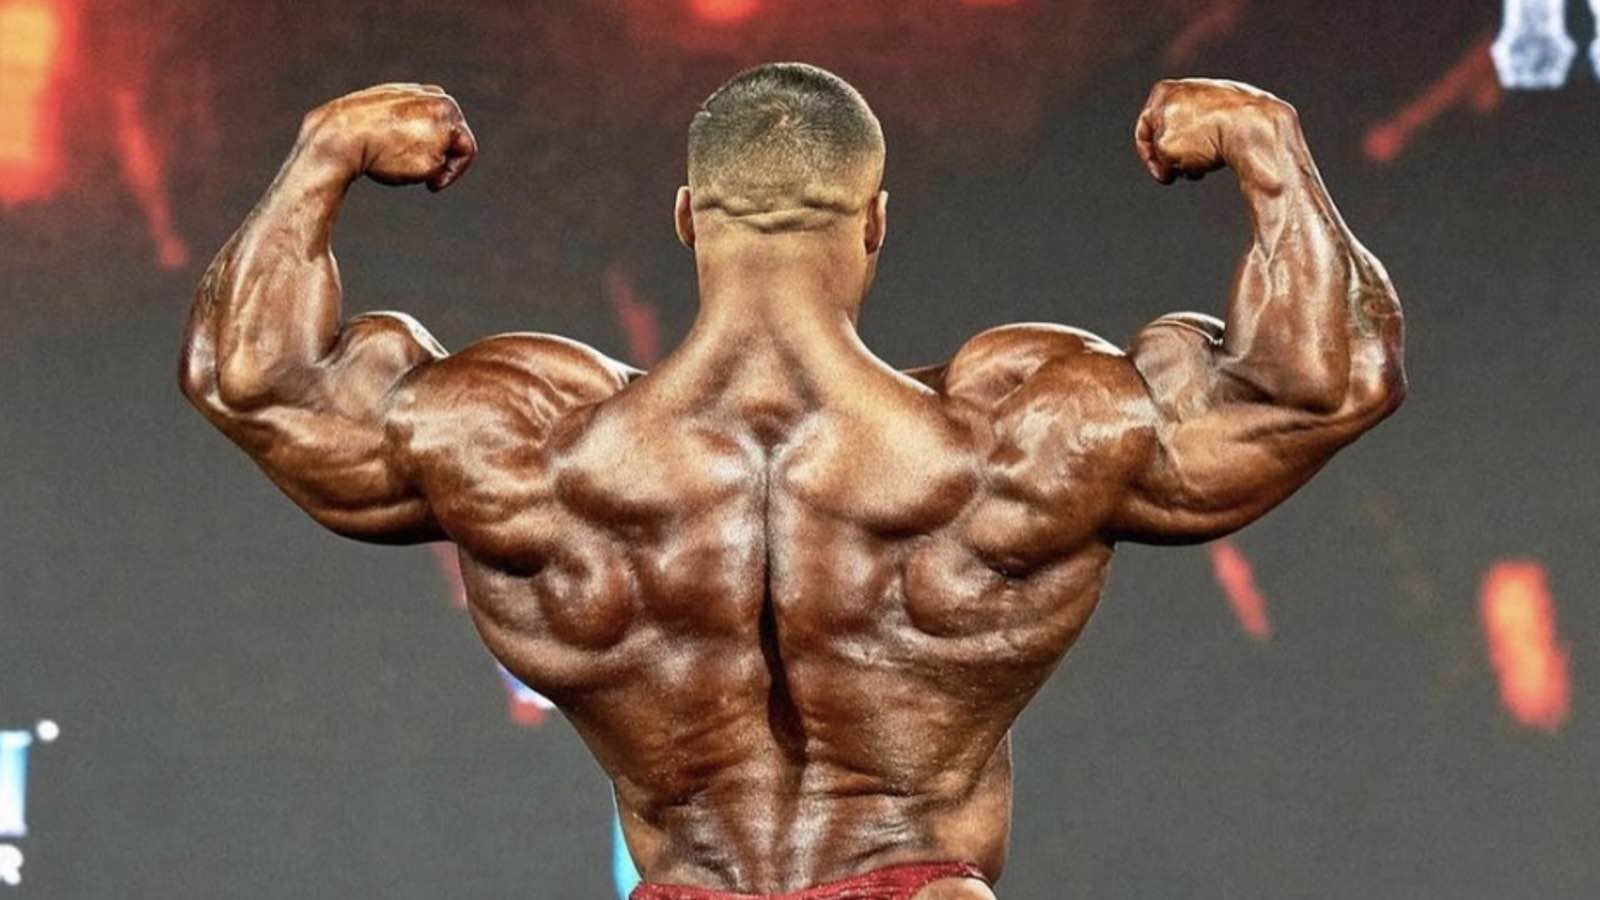 CONGRATULATIONS to Wesley Vissers on winning the Classic Physique Overall  at the 2024 IFBB Pro League Arnold Classic! Watch his Olympia Posing Video  - NPC News Online